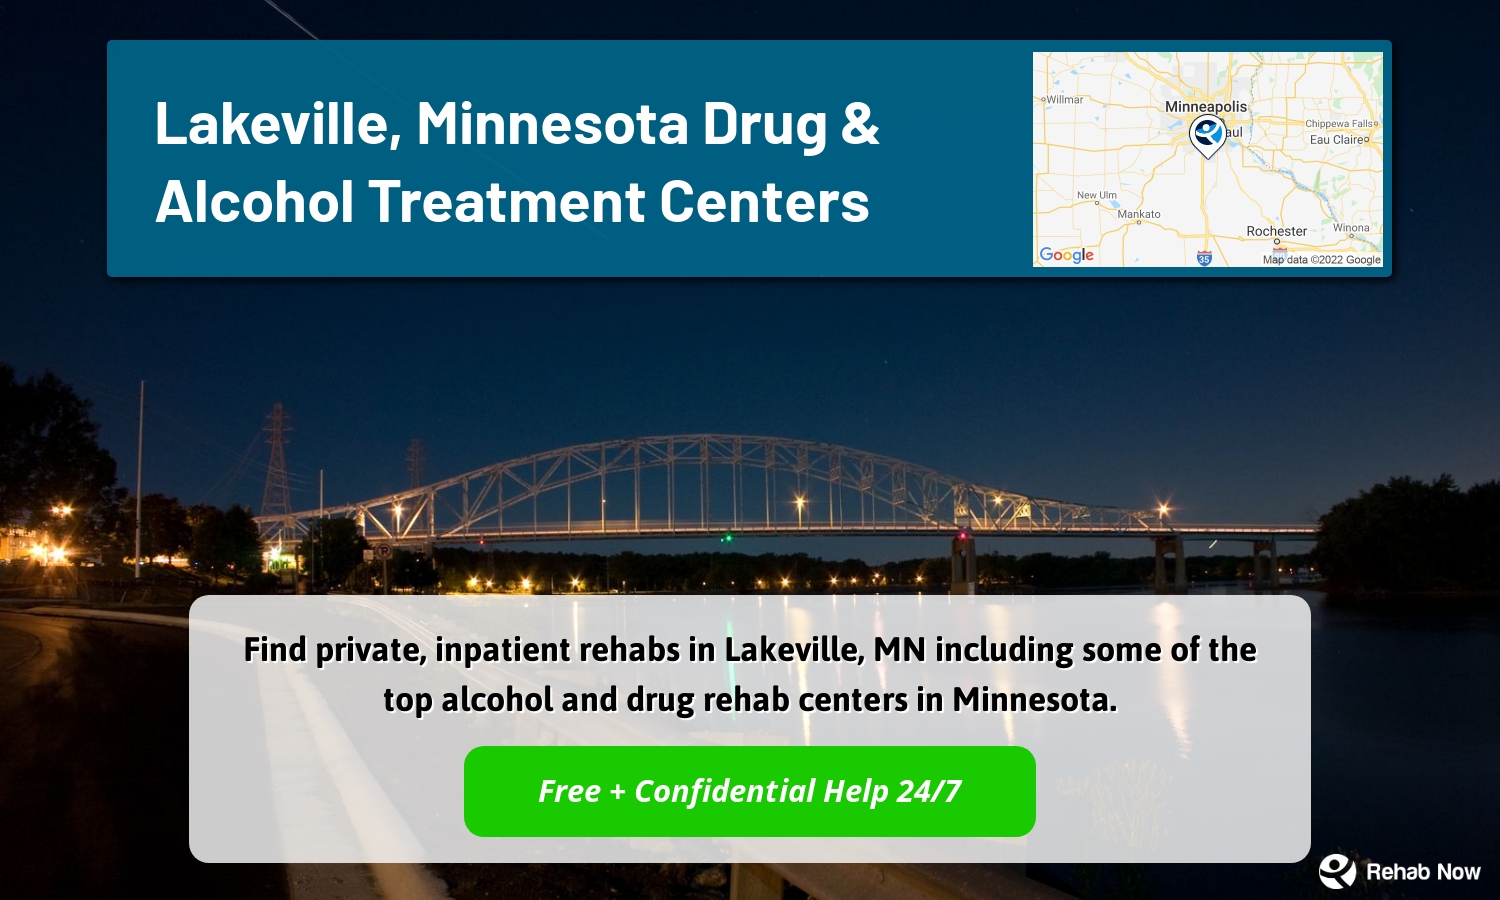 Find private, inpatient rehabs in Lakeville, MN including some of the top alcohol and drug rehab centers in Minnesota.